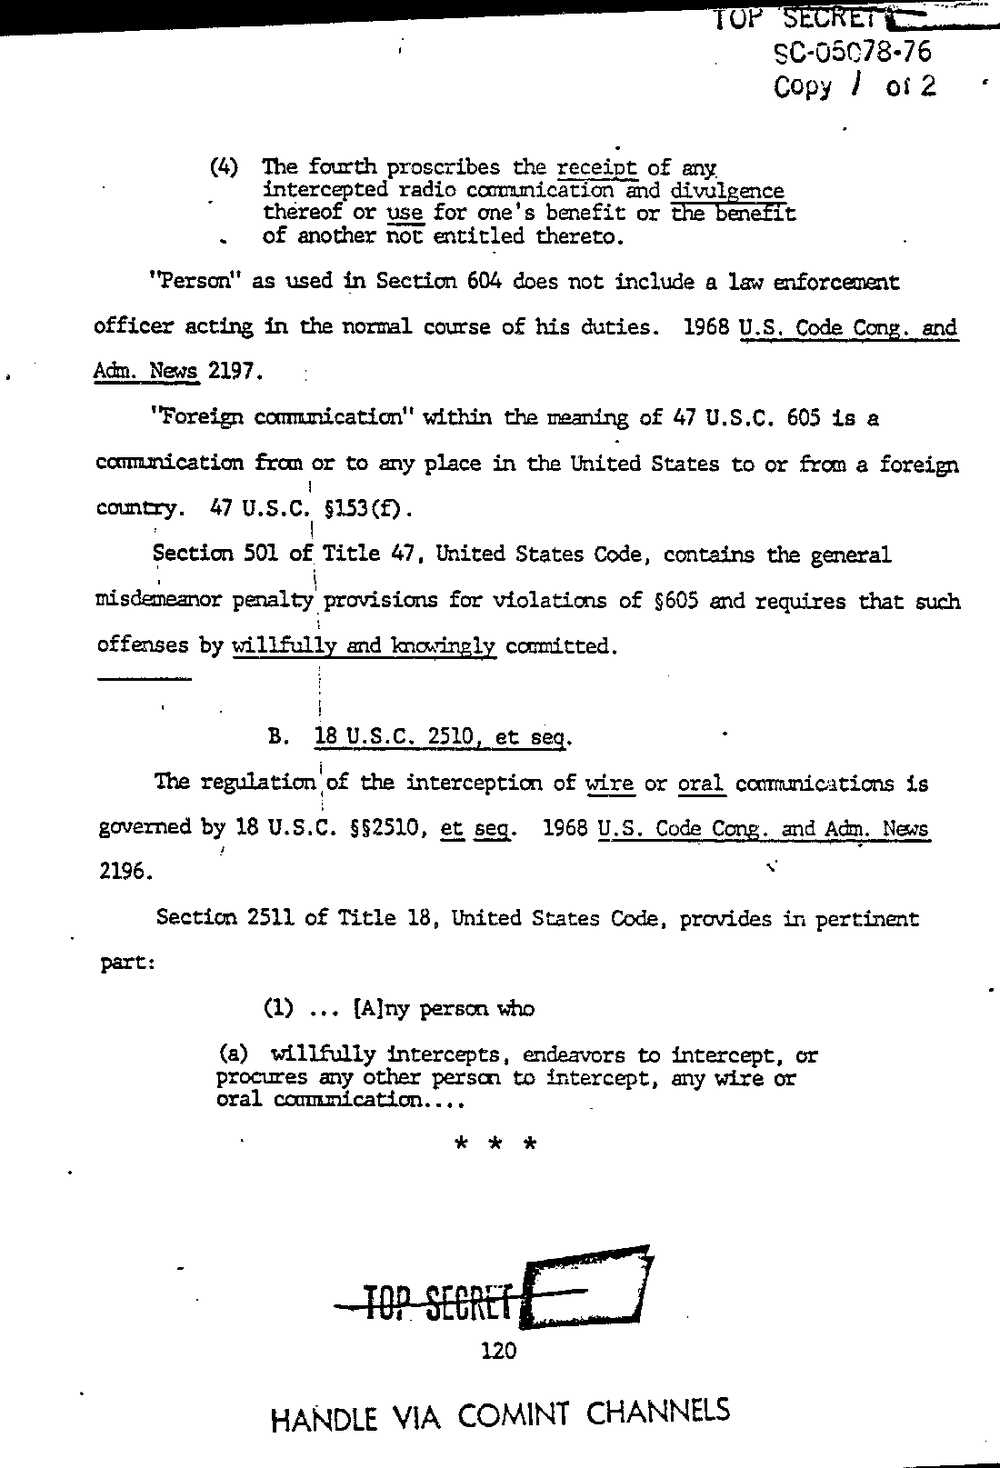 Page 128 from Report on Inquiry Into CIA Related Electronic Surveillance Activities